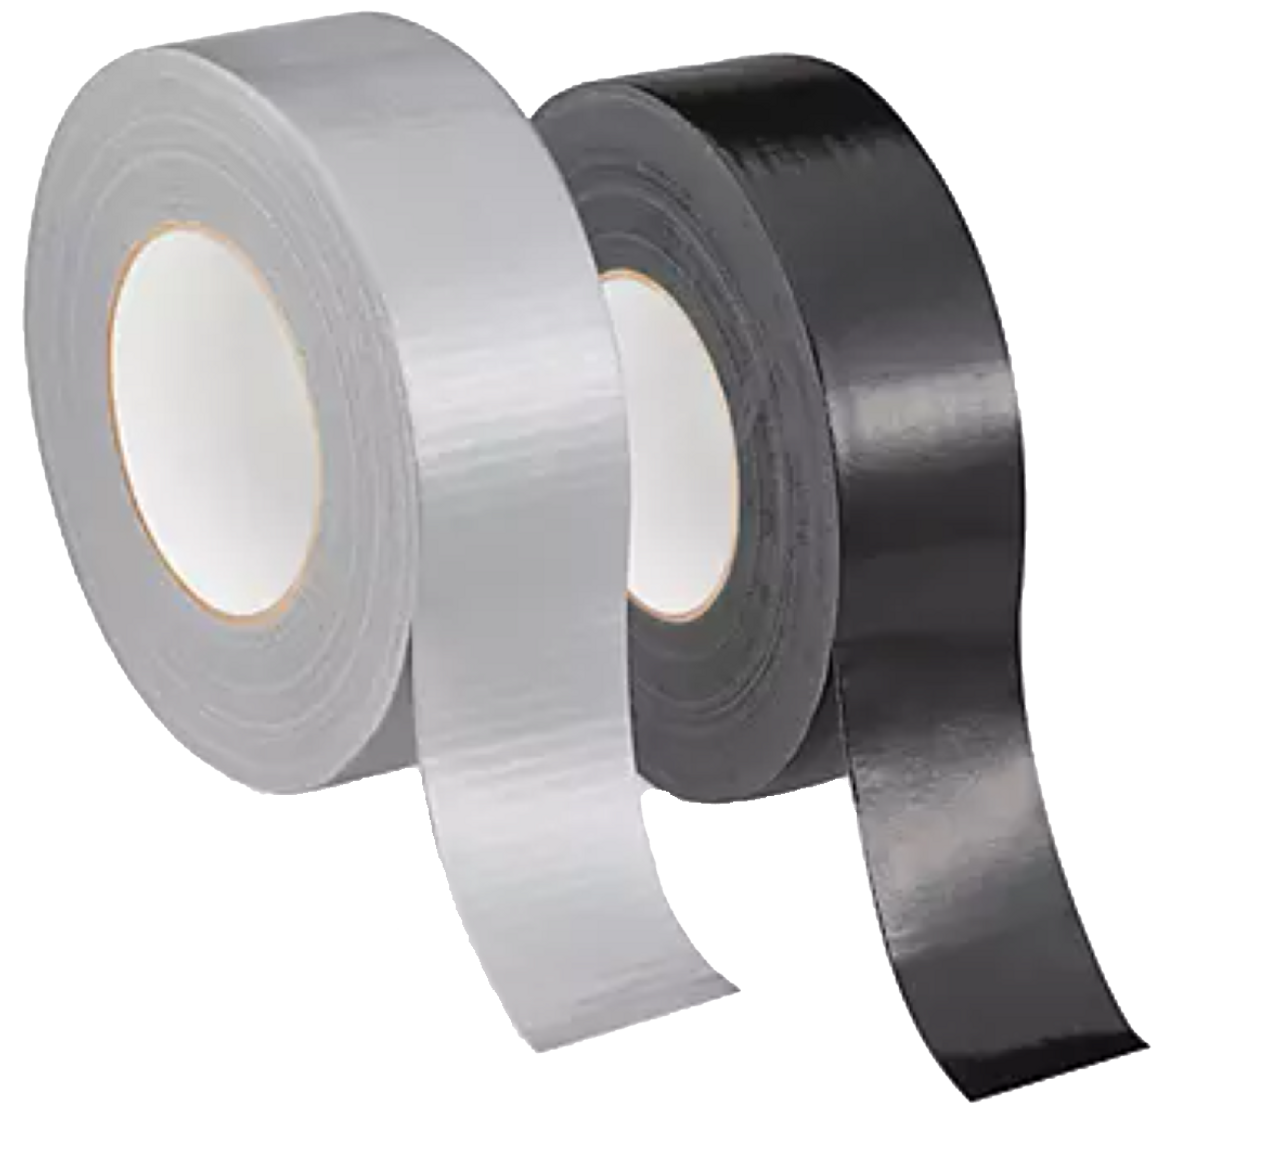 Duct Tape Heavy Duty Black Color Roll